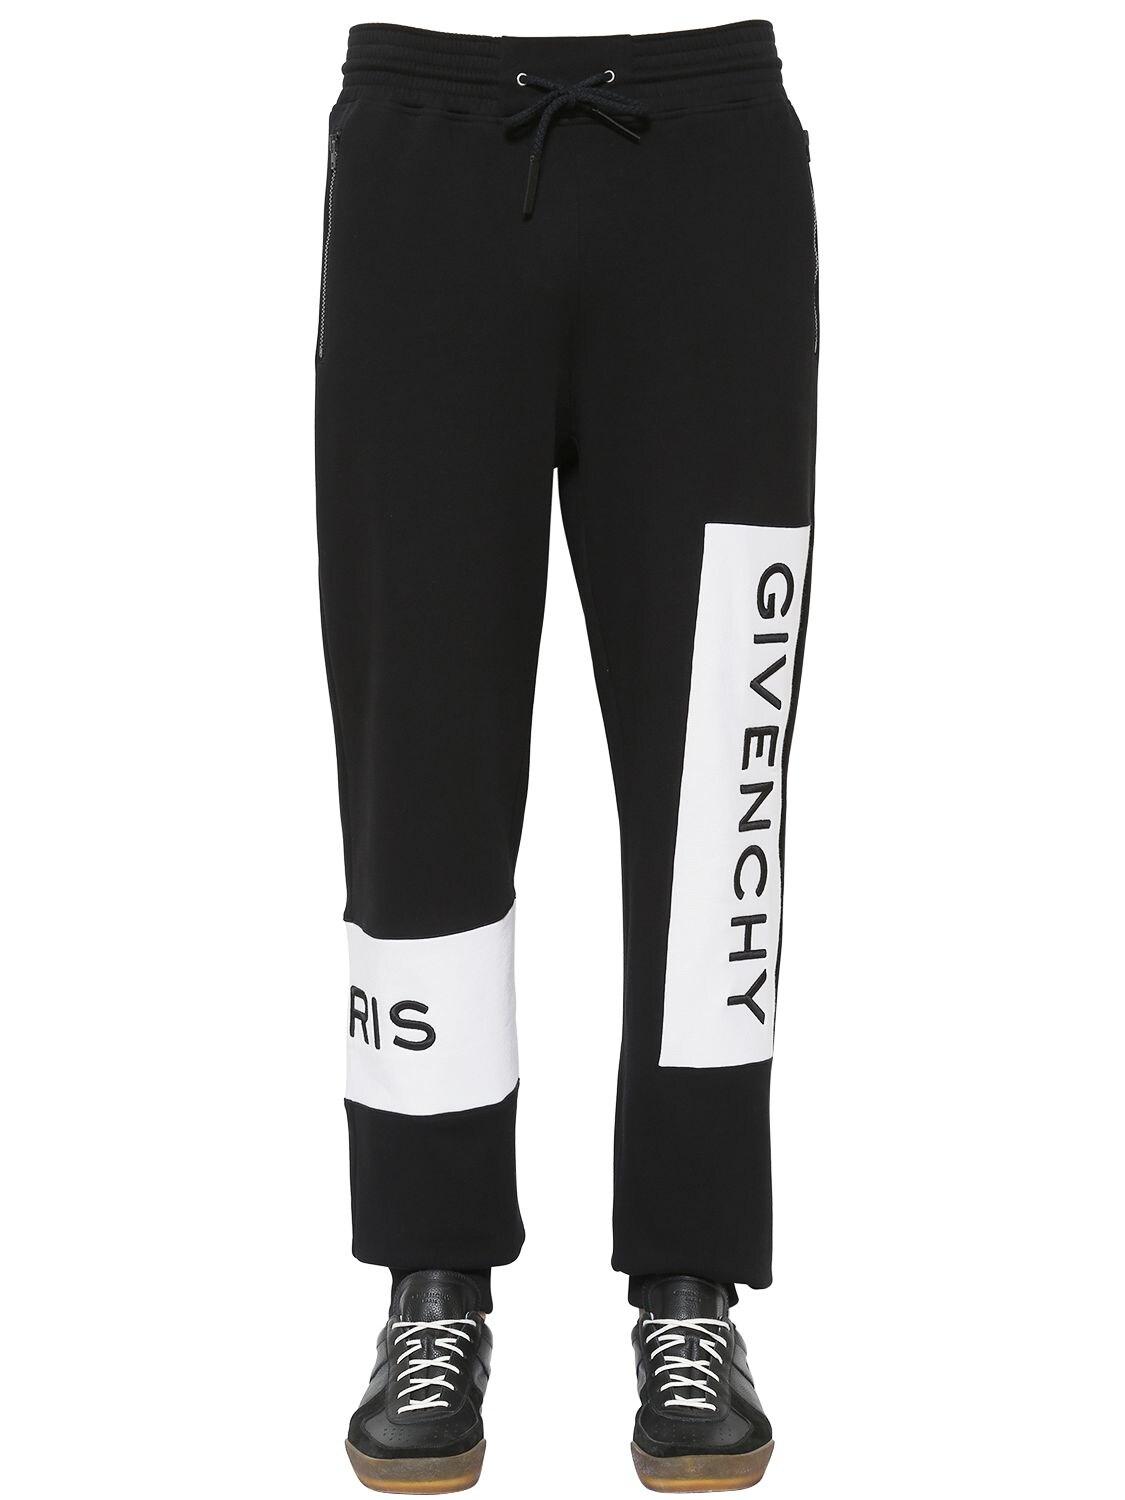 Givenchy Logo Print Sweatpants in Black for Men - Lyst